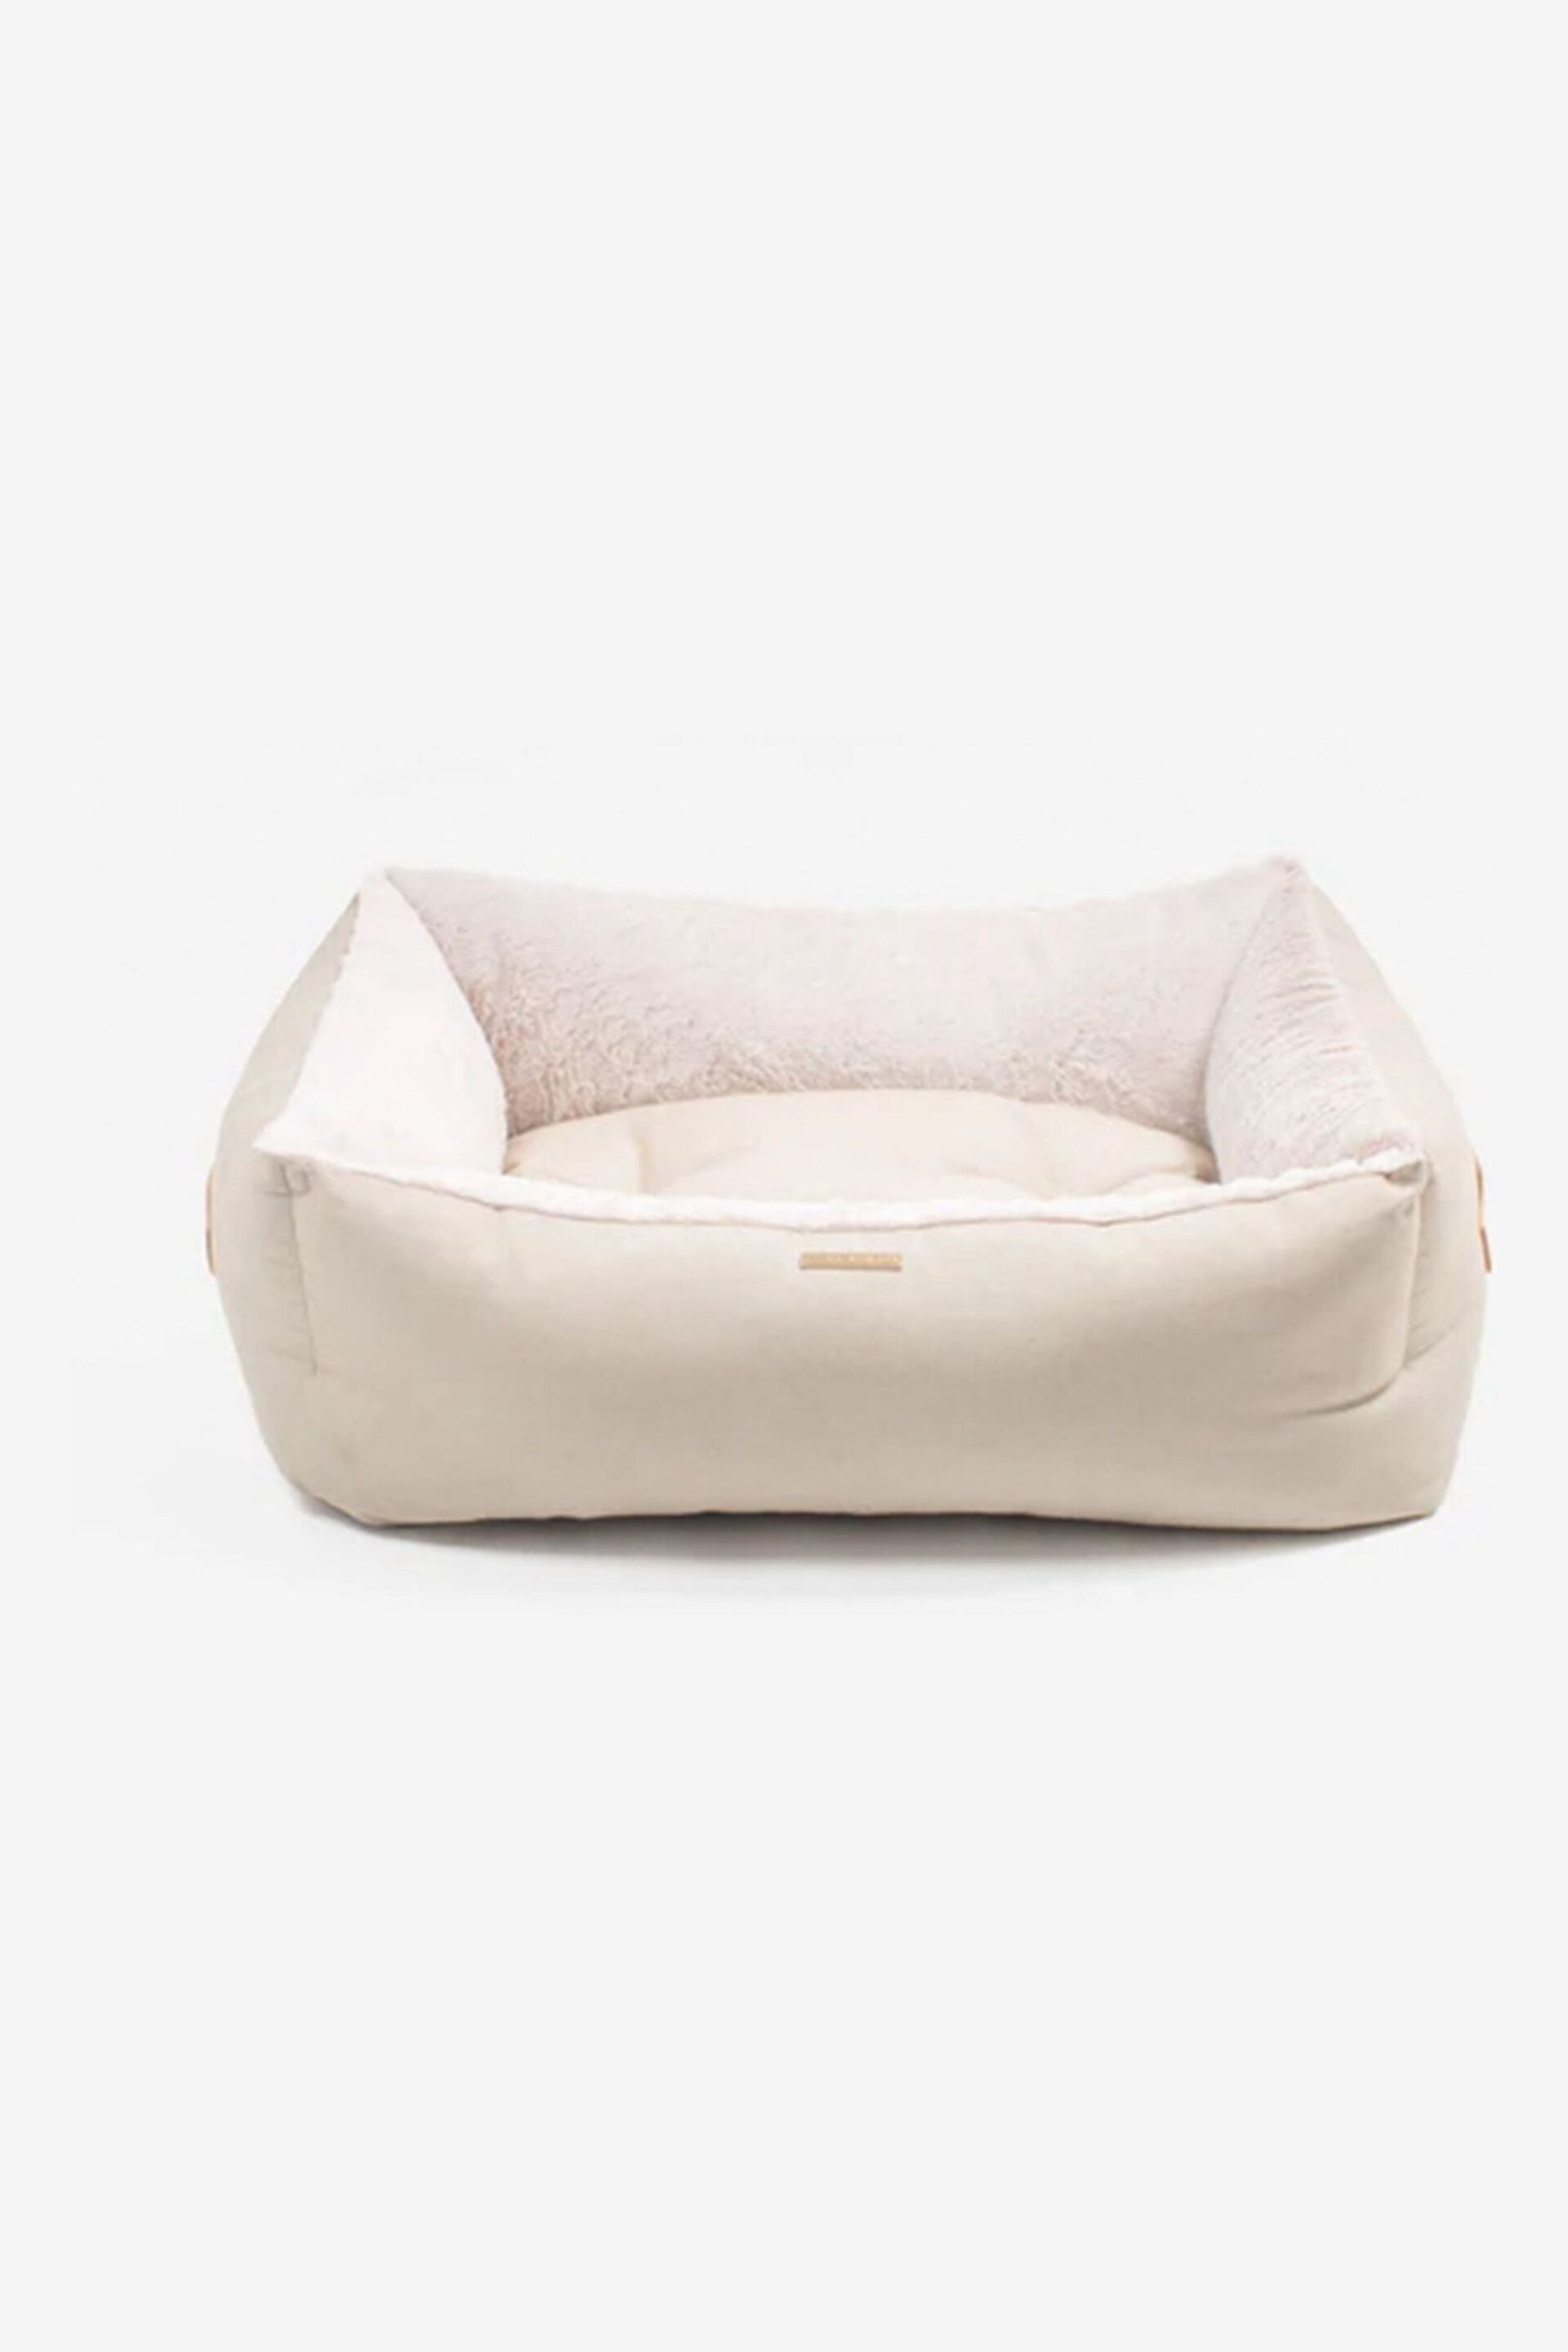 Lords and Labradors Natural Essentials Twill Oval Dog Bed - Image 6 of 6